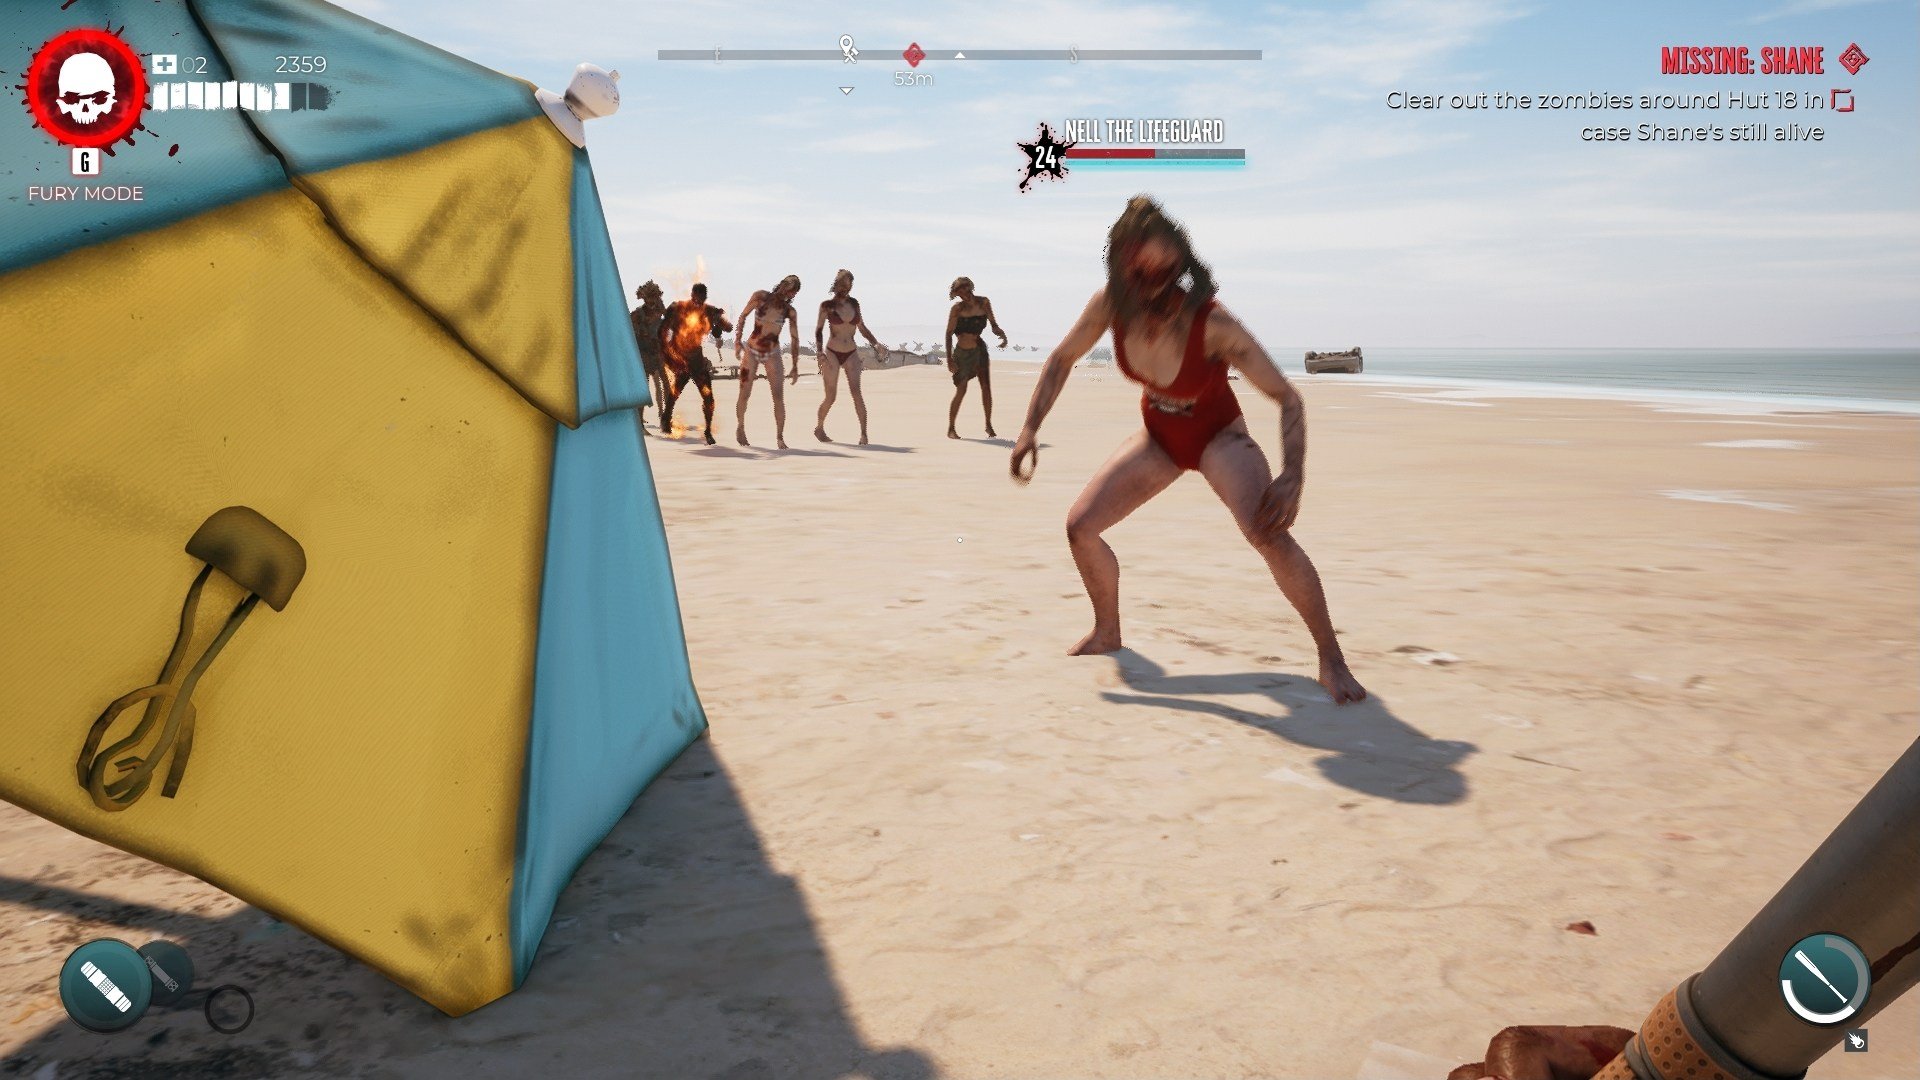 Dead Island 2 screenshot showing several zombies on a beach near the sea with a fallen beach umbrella lying nearby. 